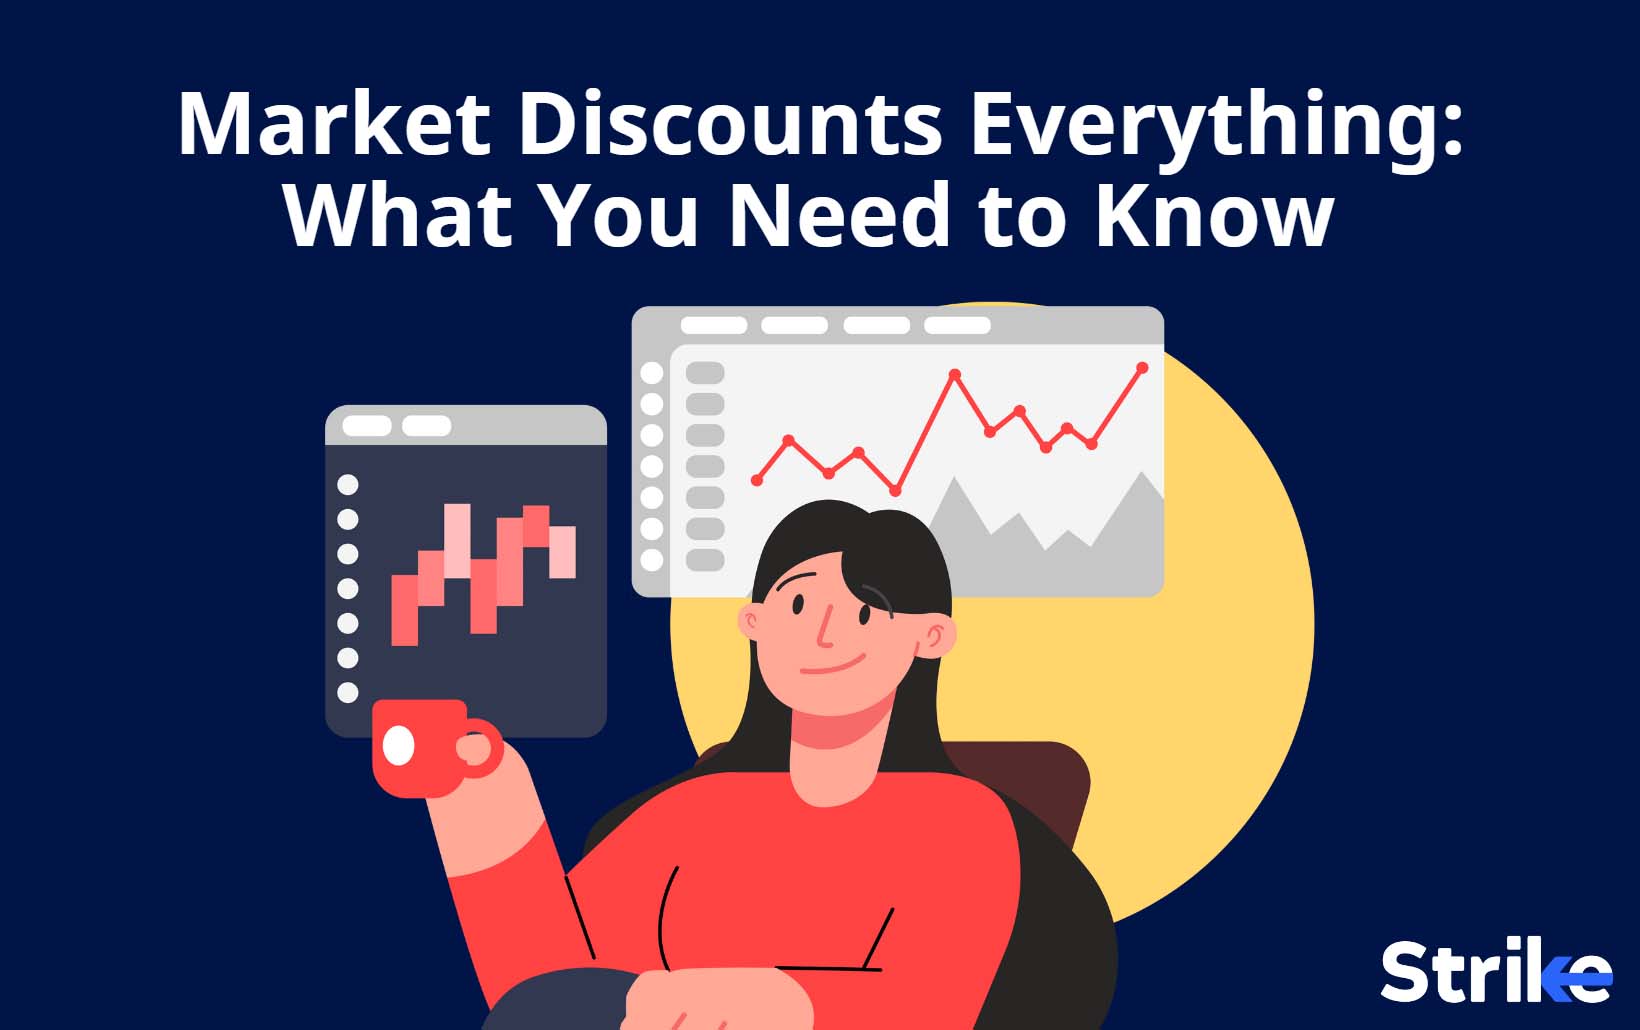 Market Discounts Everything: What You Need to Know